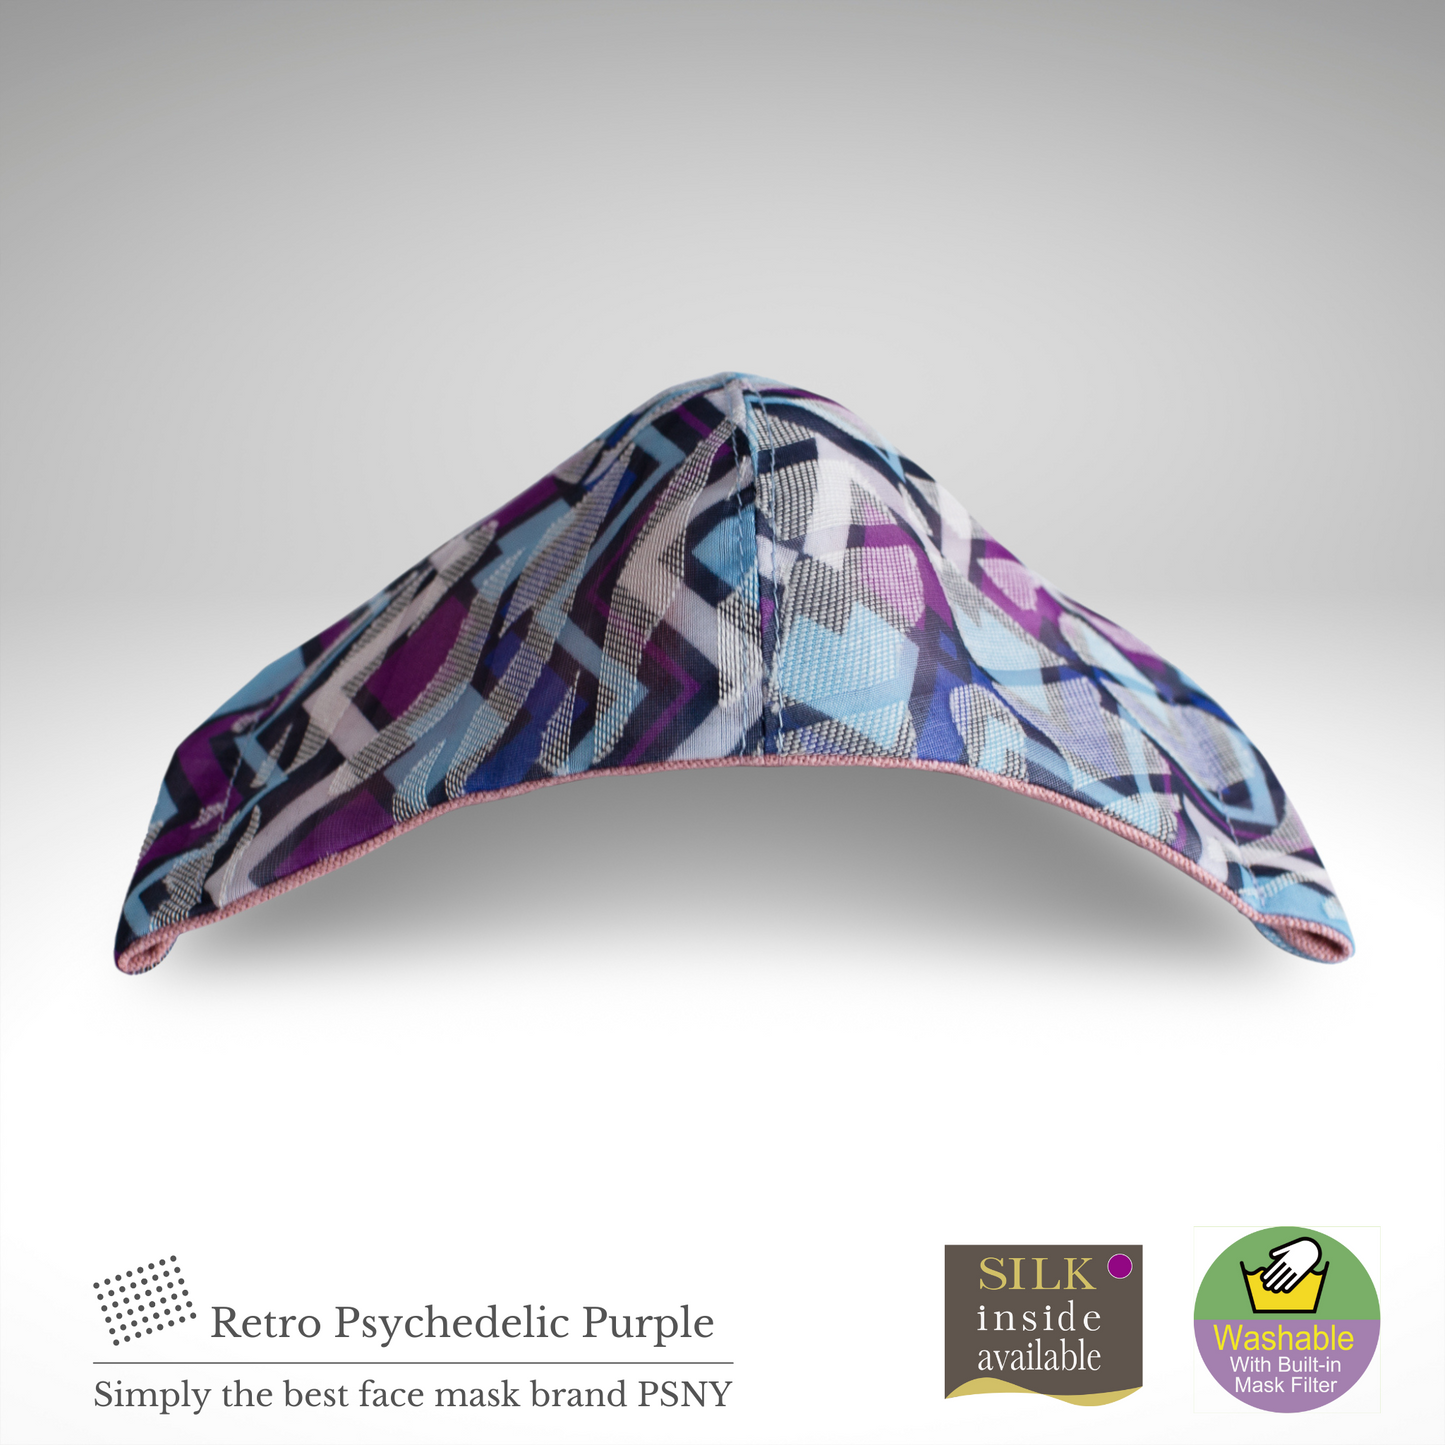 PSNY Retro Psychedelic Purple Mask with Filter LT09